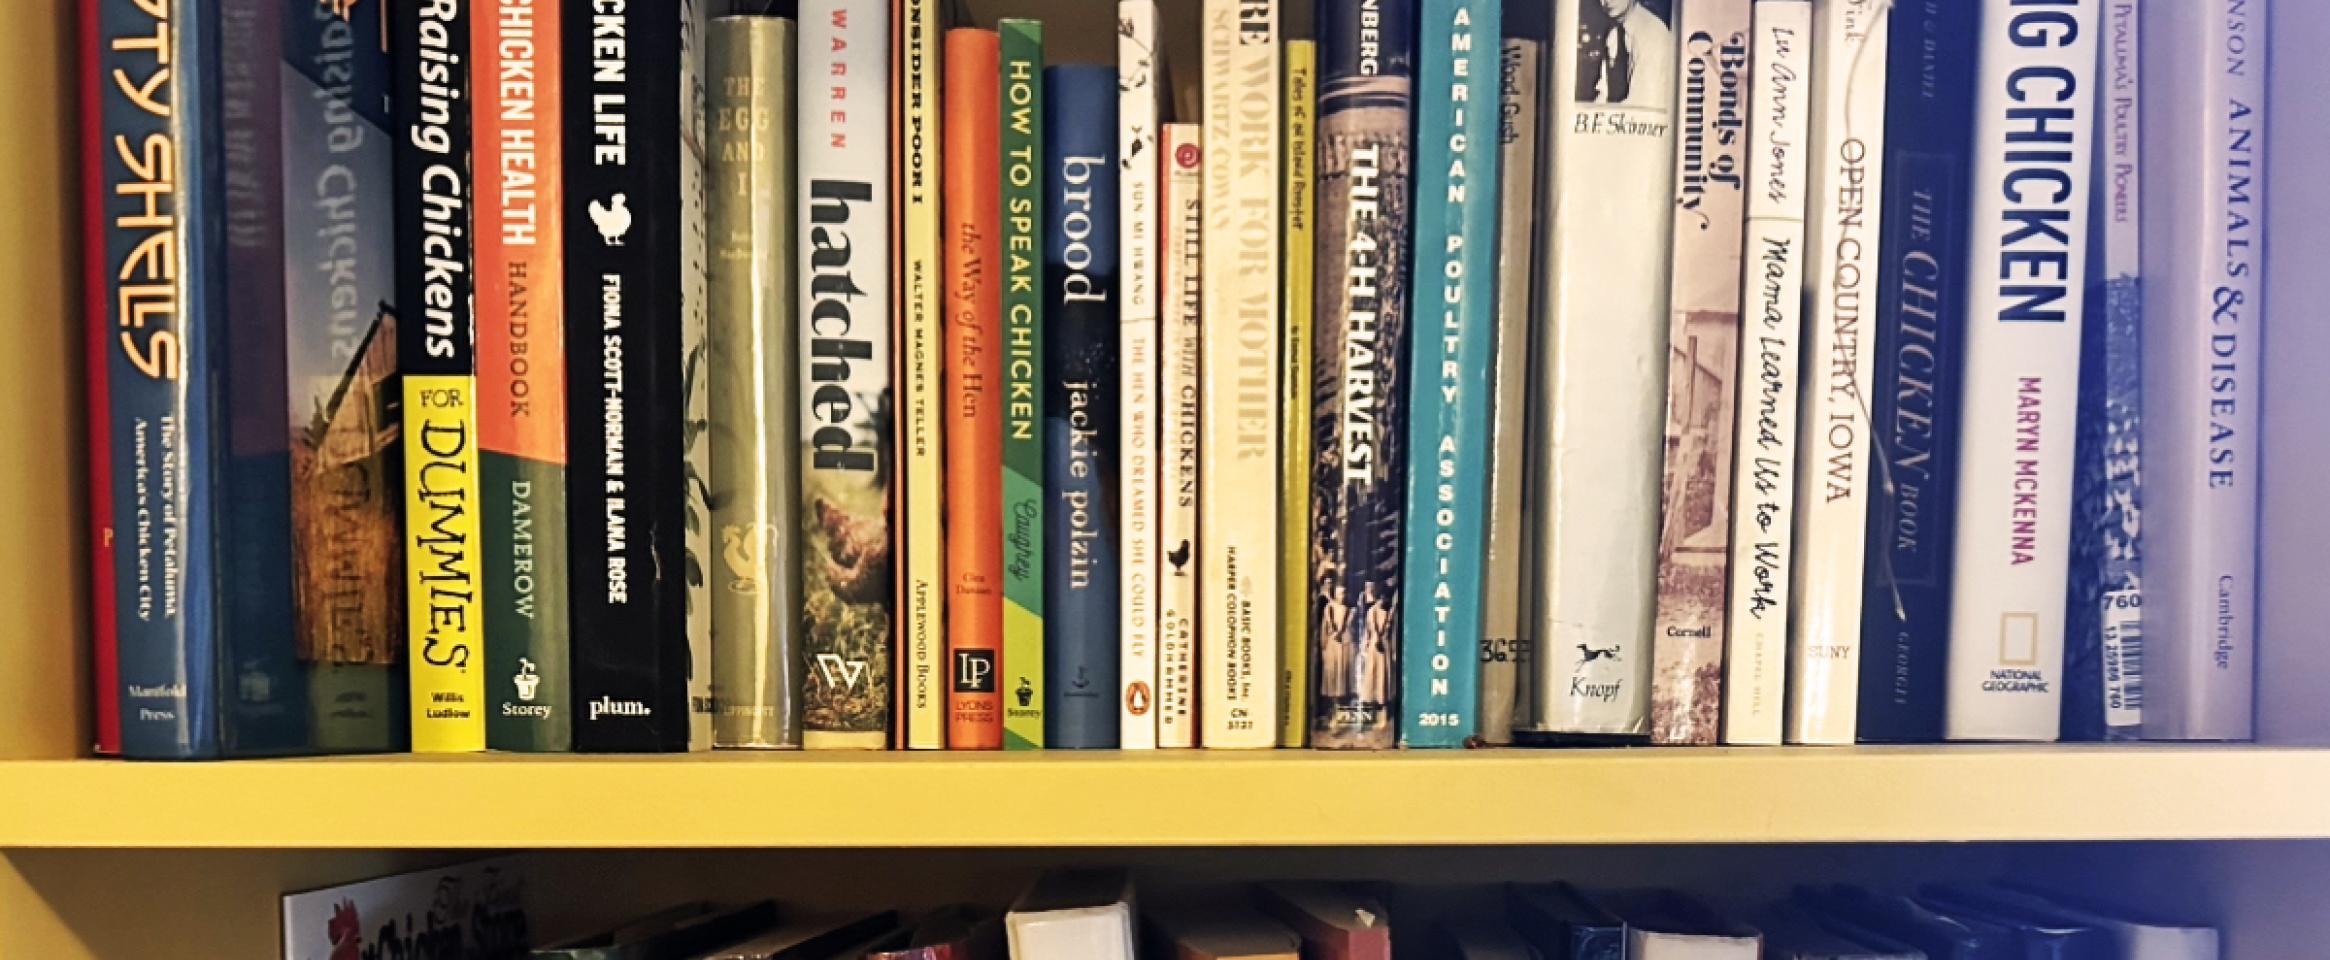 Rectangular photo of a close up view of books on a bookshelf, with spines facing out and many titles related to chickens.